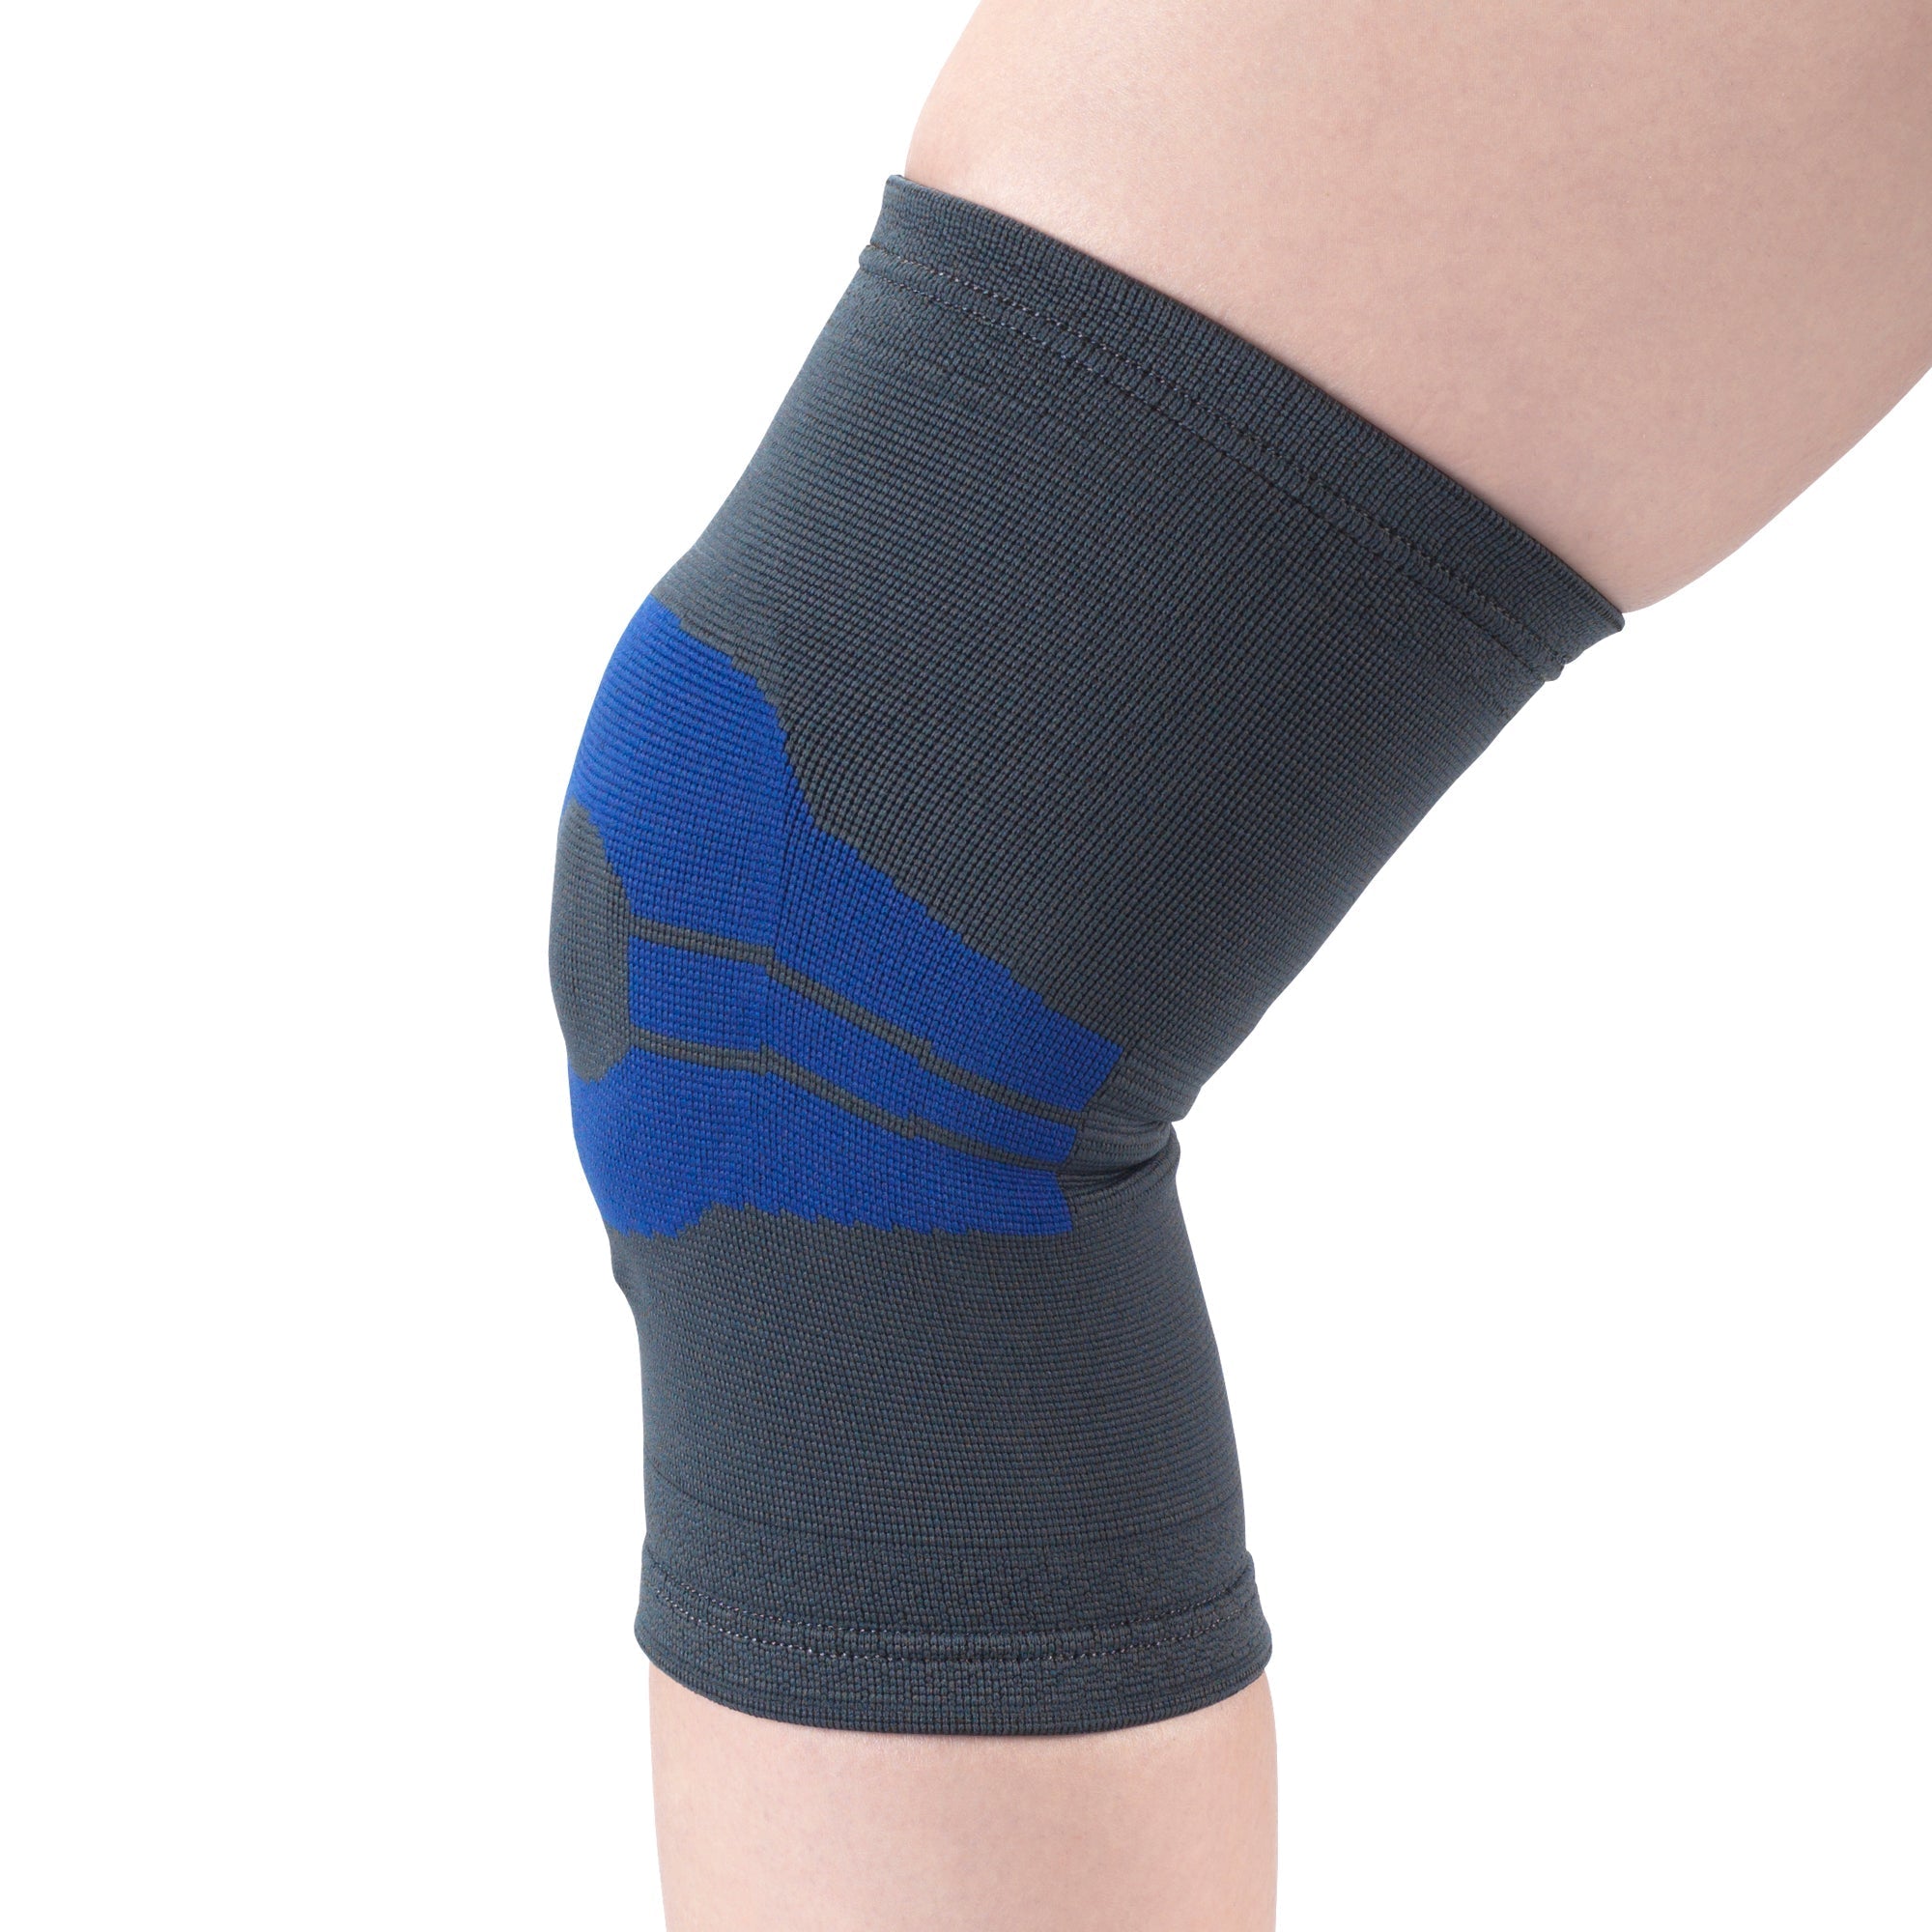 OTC Knee Support Wrap with Compression Gel Insert- 2436 - Midwest DME Supply